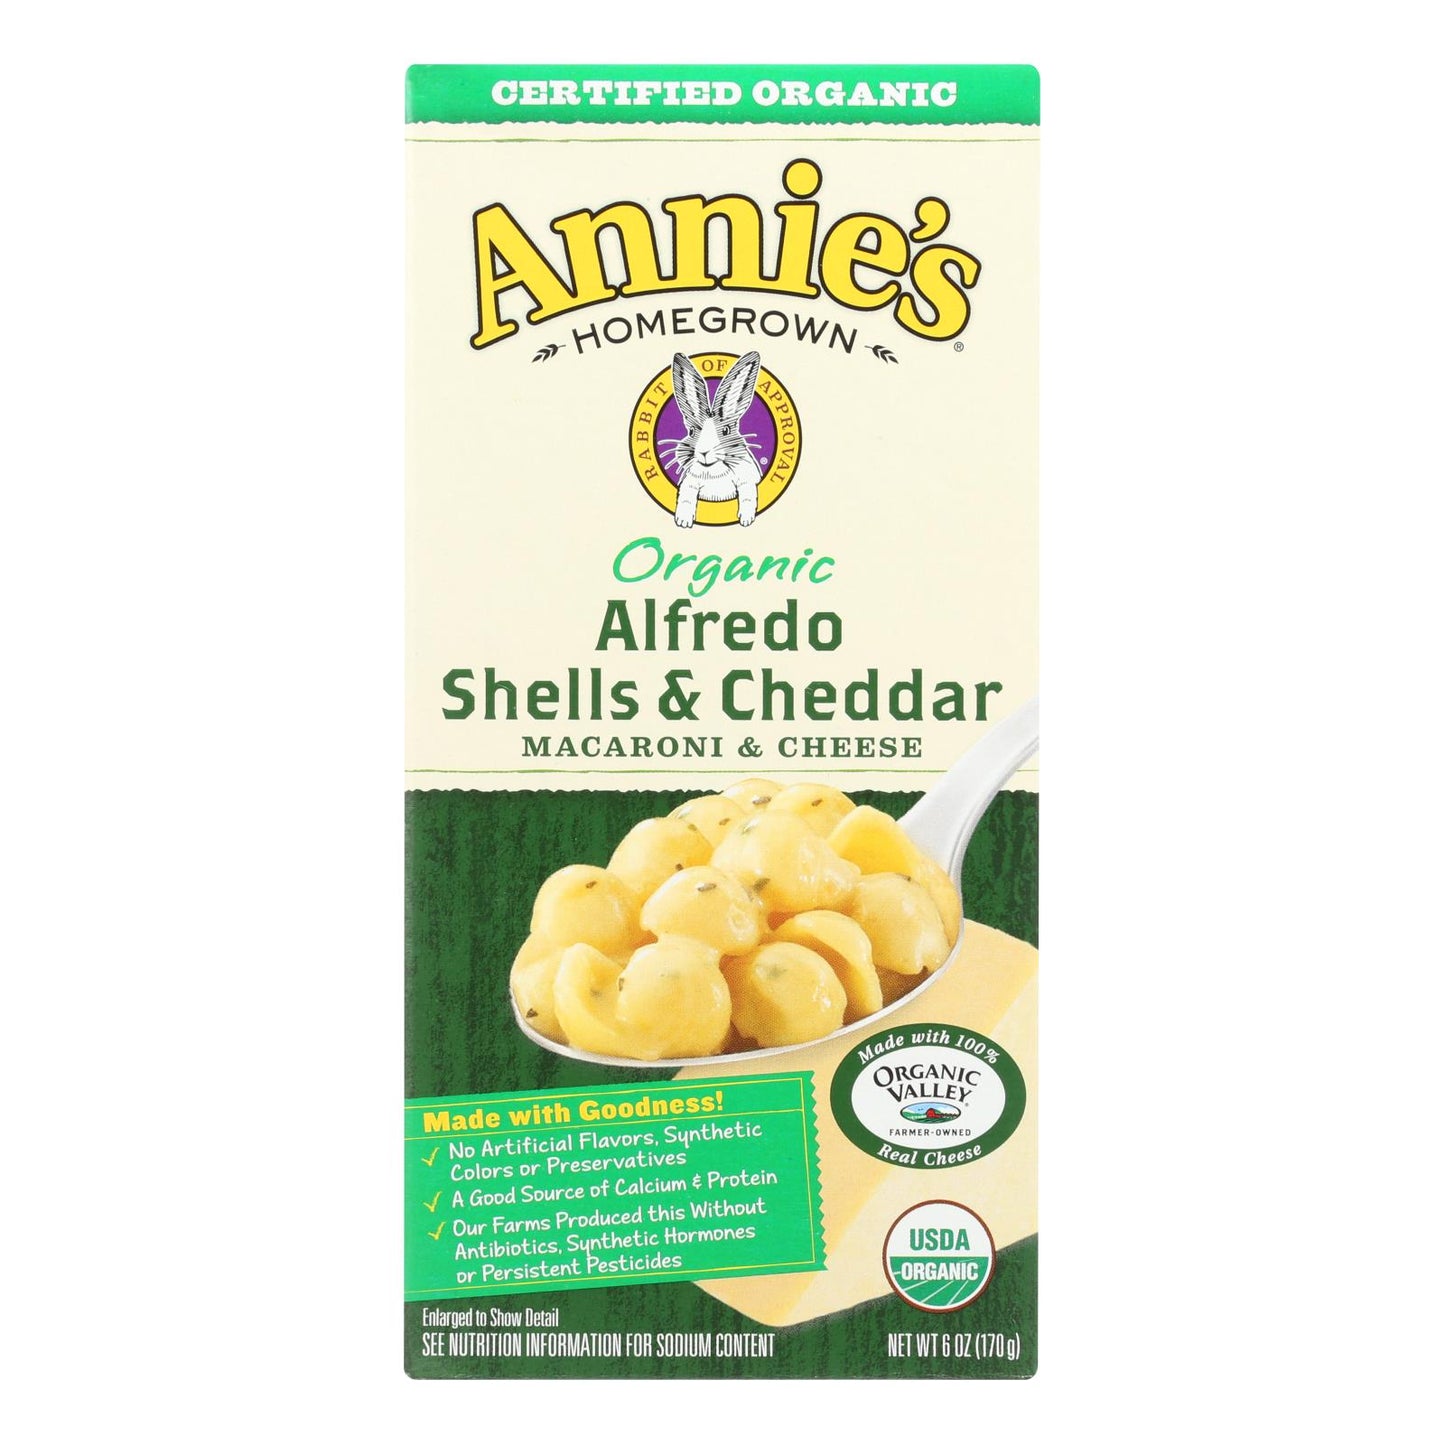 Annies Homegrown Macaroni And Cheese - Organic - Alfredo Shells And Cheddar - 6 Oz - Case Of 12 | OnlyNaturals.us